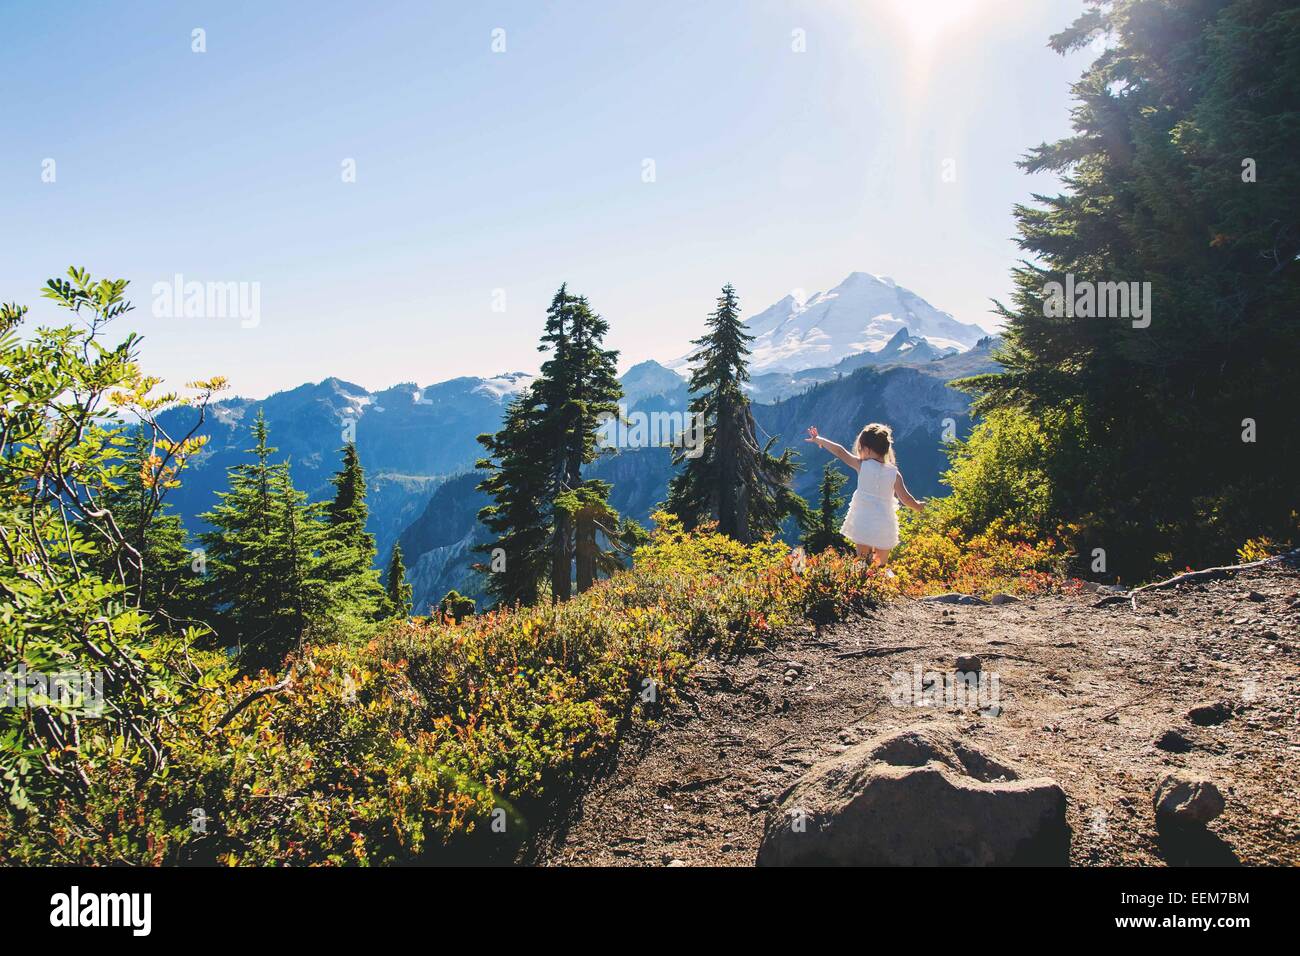 Girl standing on mountain trail with her arm outstretched, USA Stock Photo